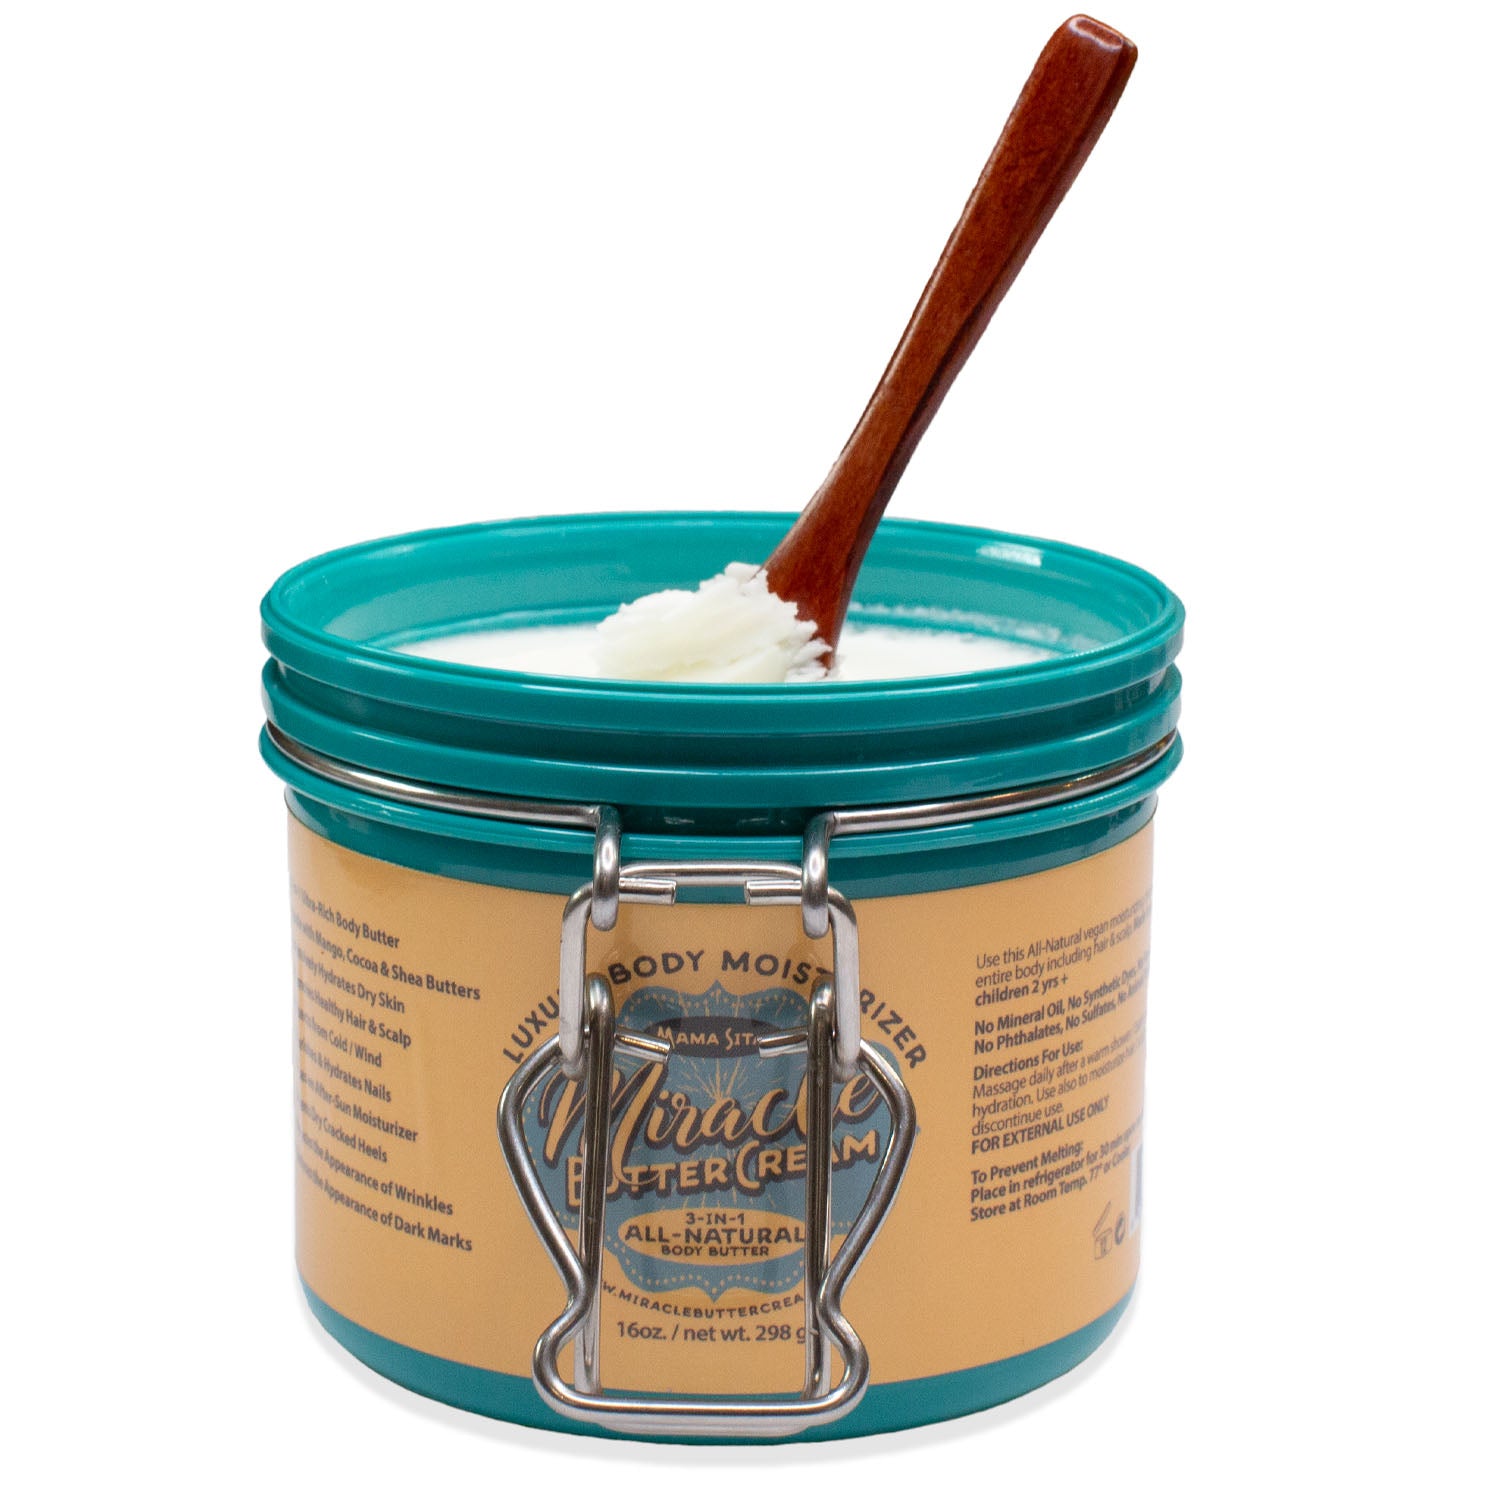 Paste Wax, For Wood, Adds Richness, 16-oz.